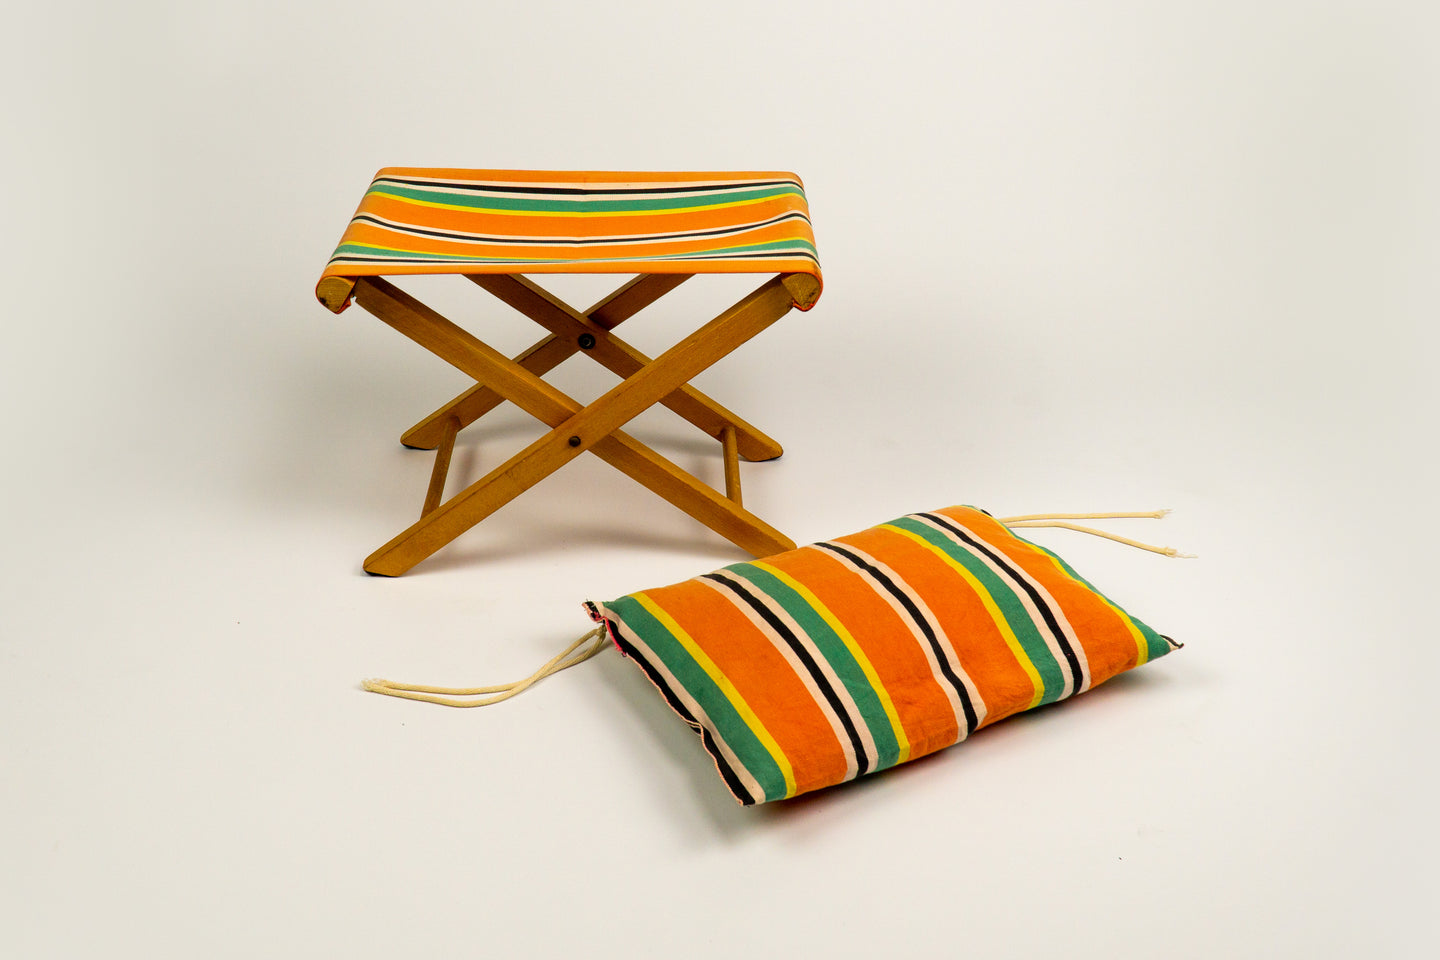 Vintage foldable chair with matching pillow